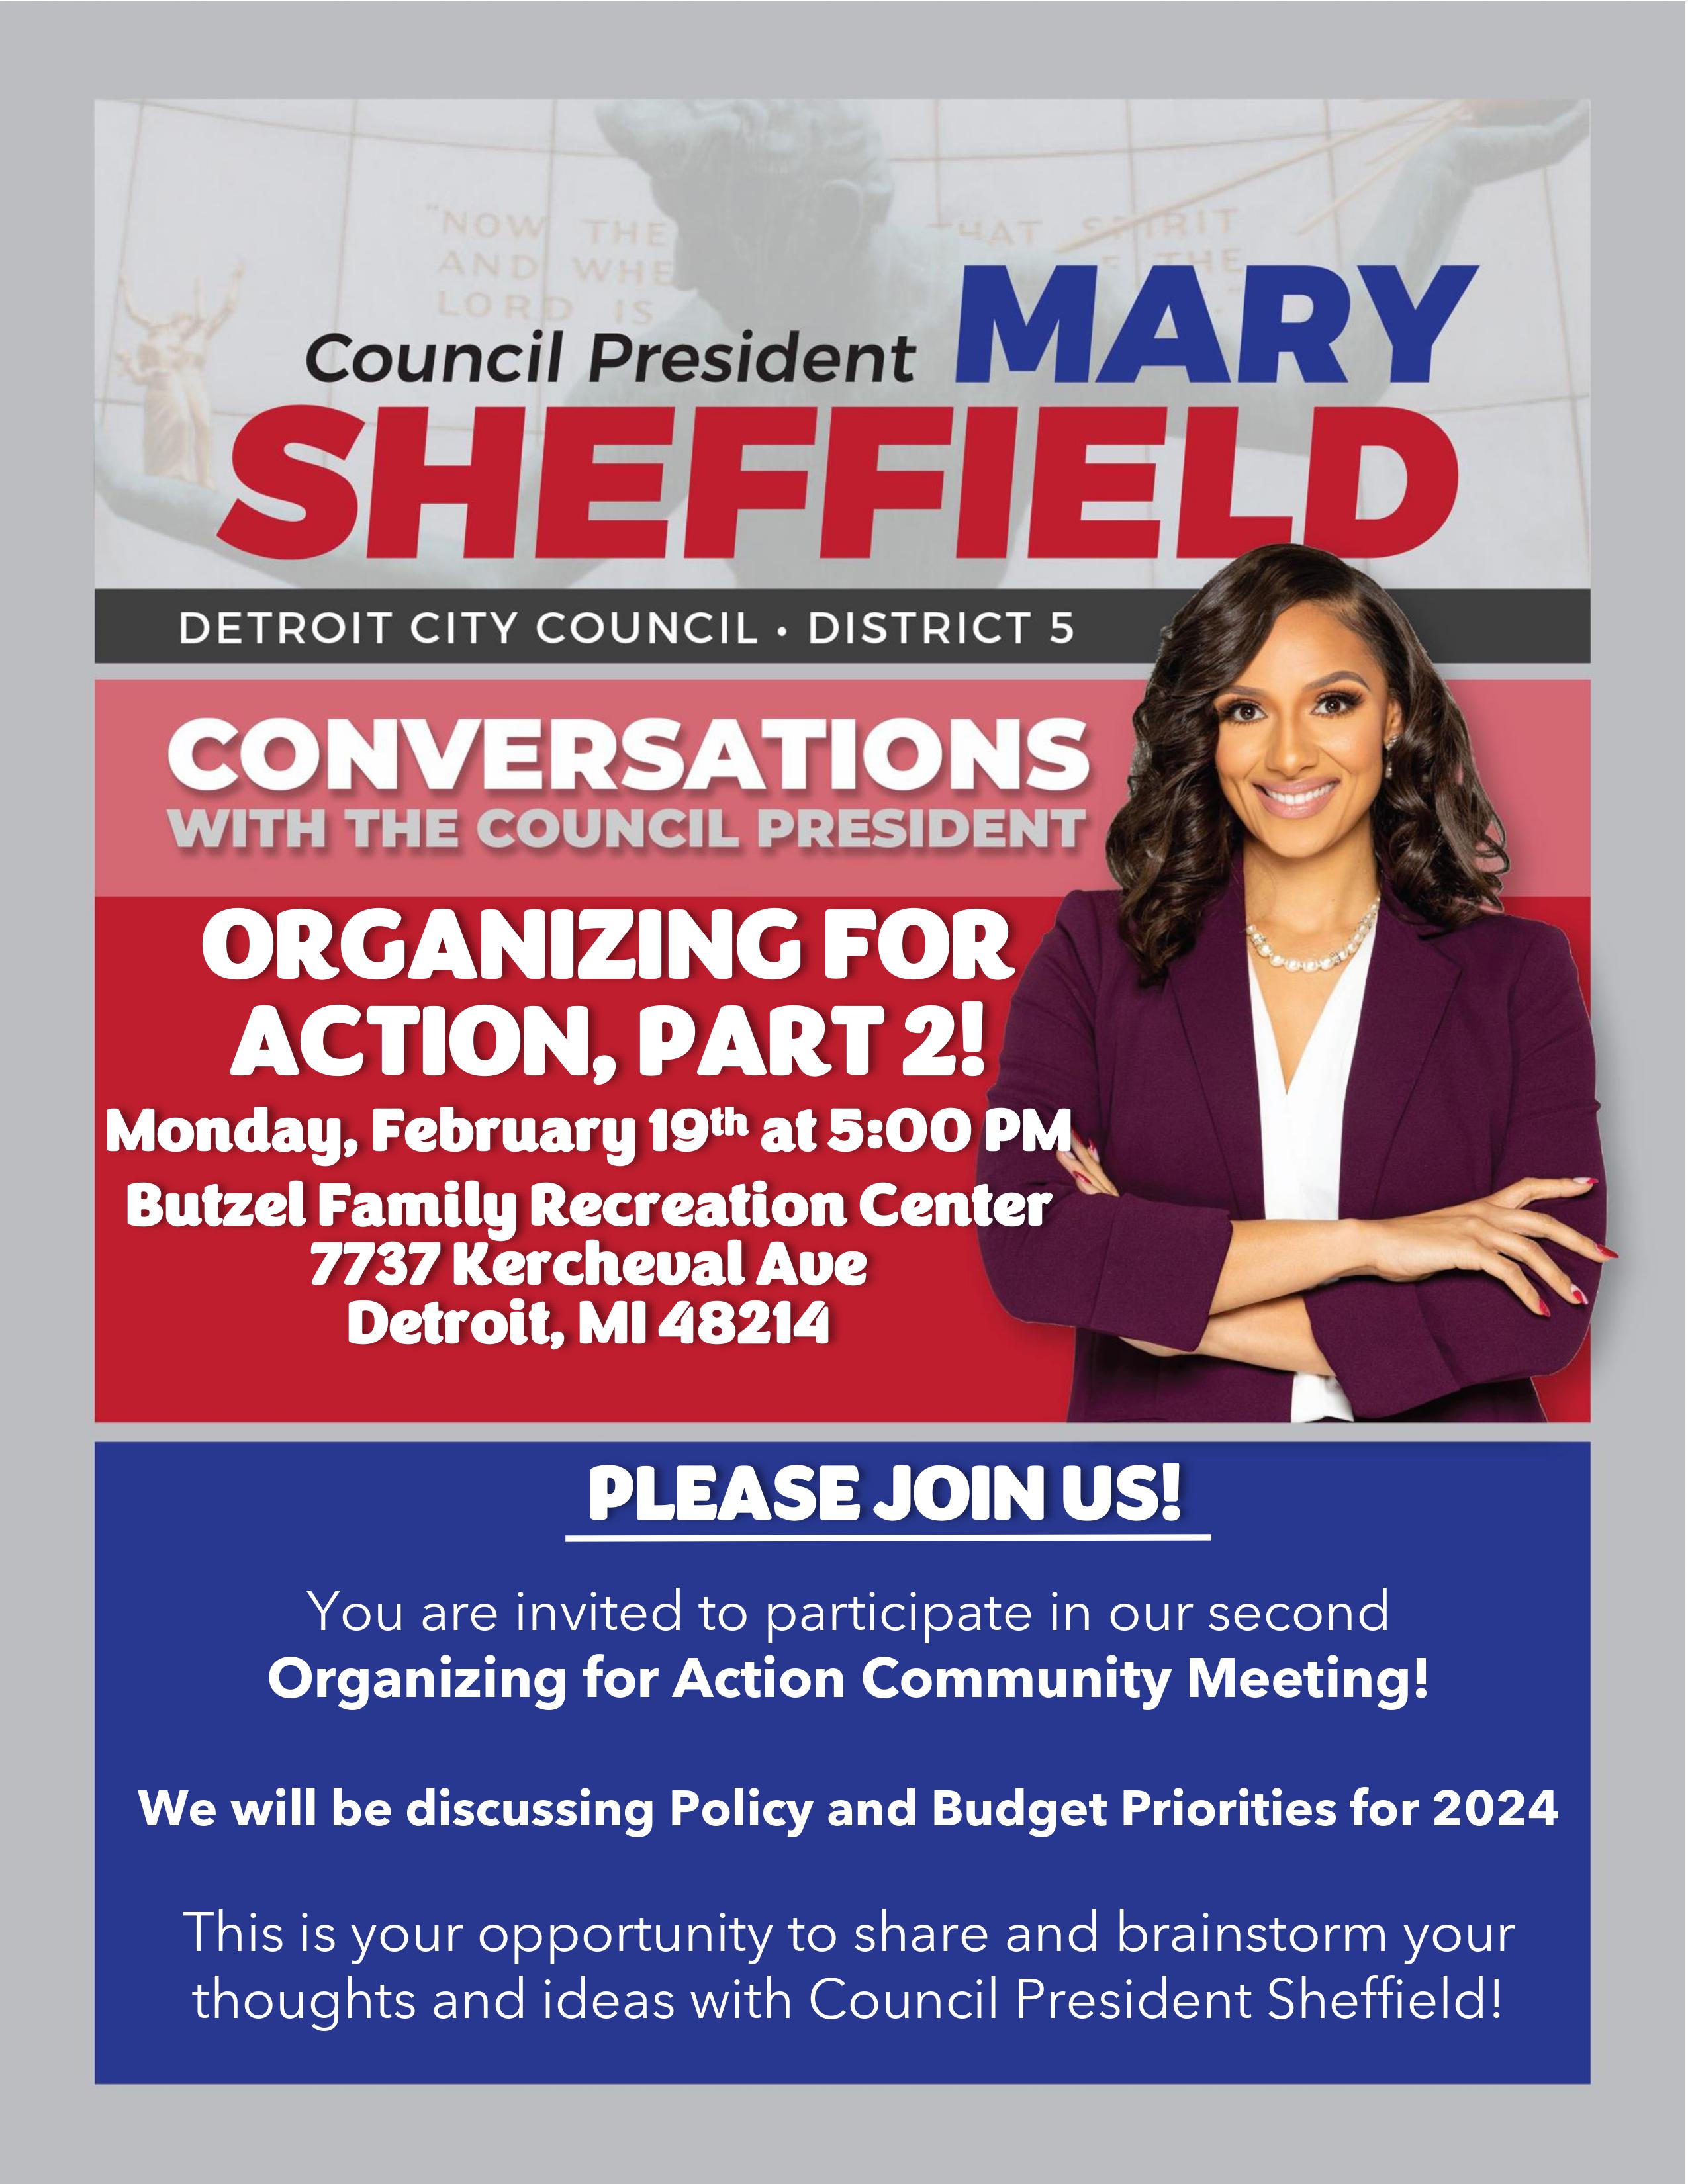 Conversations with the Council President: Organizing for Action, Part 2 to be held on Monday, February 19th at 5 pm at Butzel Family Recreation Center